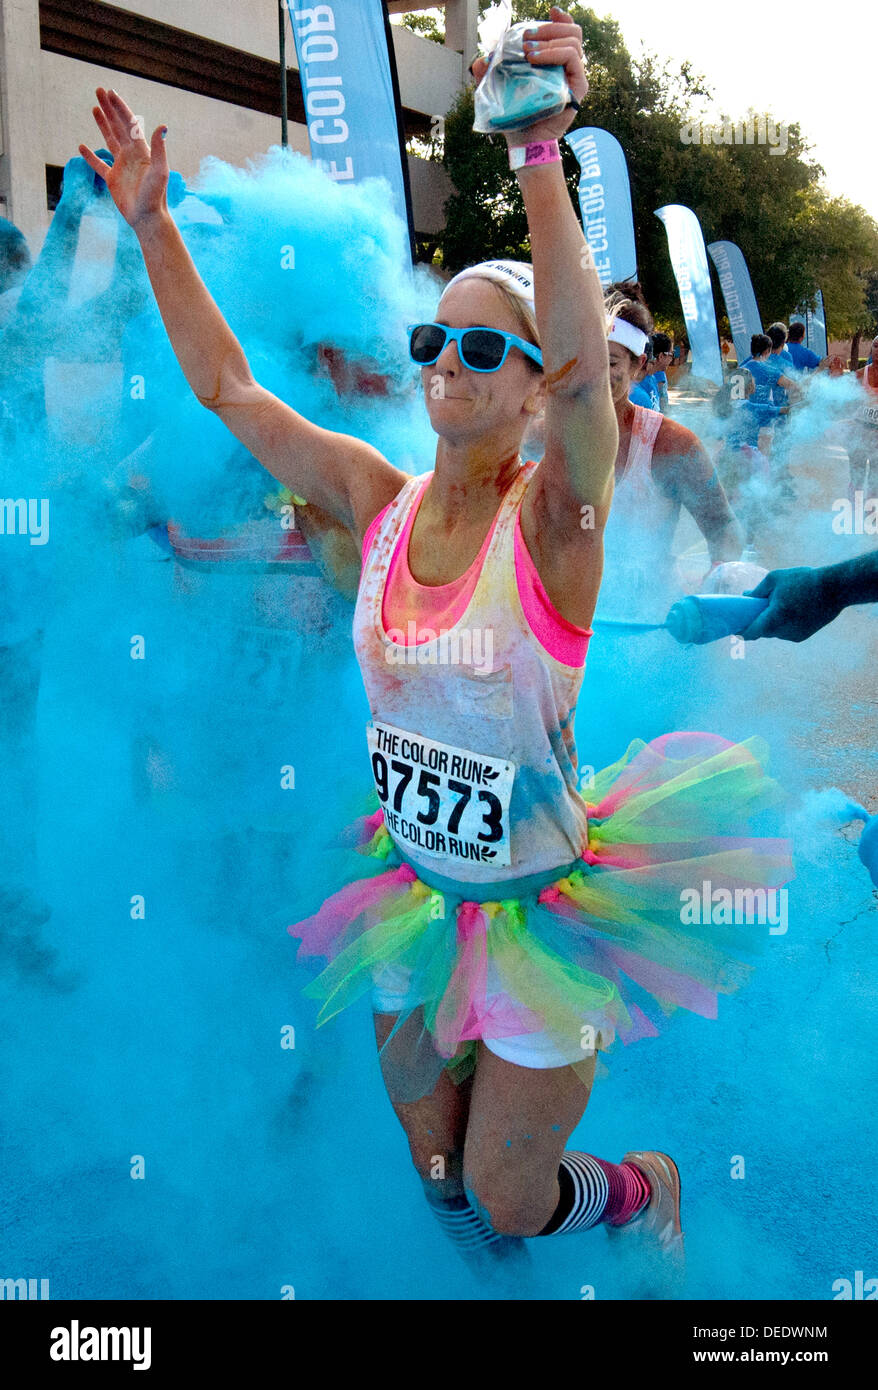 A participant is sprayed with blue colored powder during The Color Run September 7, 2013 in Wichita Falls, Texas. The Color Run is a fun 5K race where participants are sprayed with colorful powders. Stock Photo